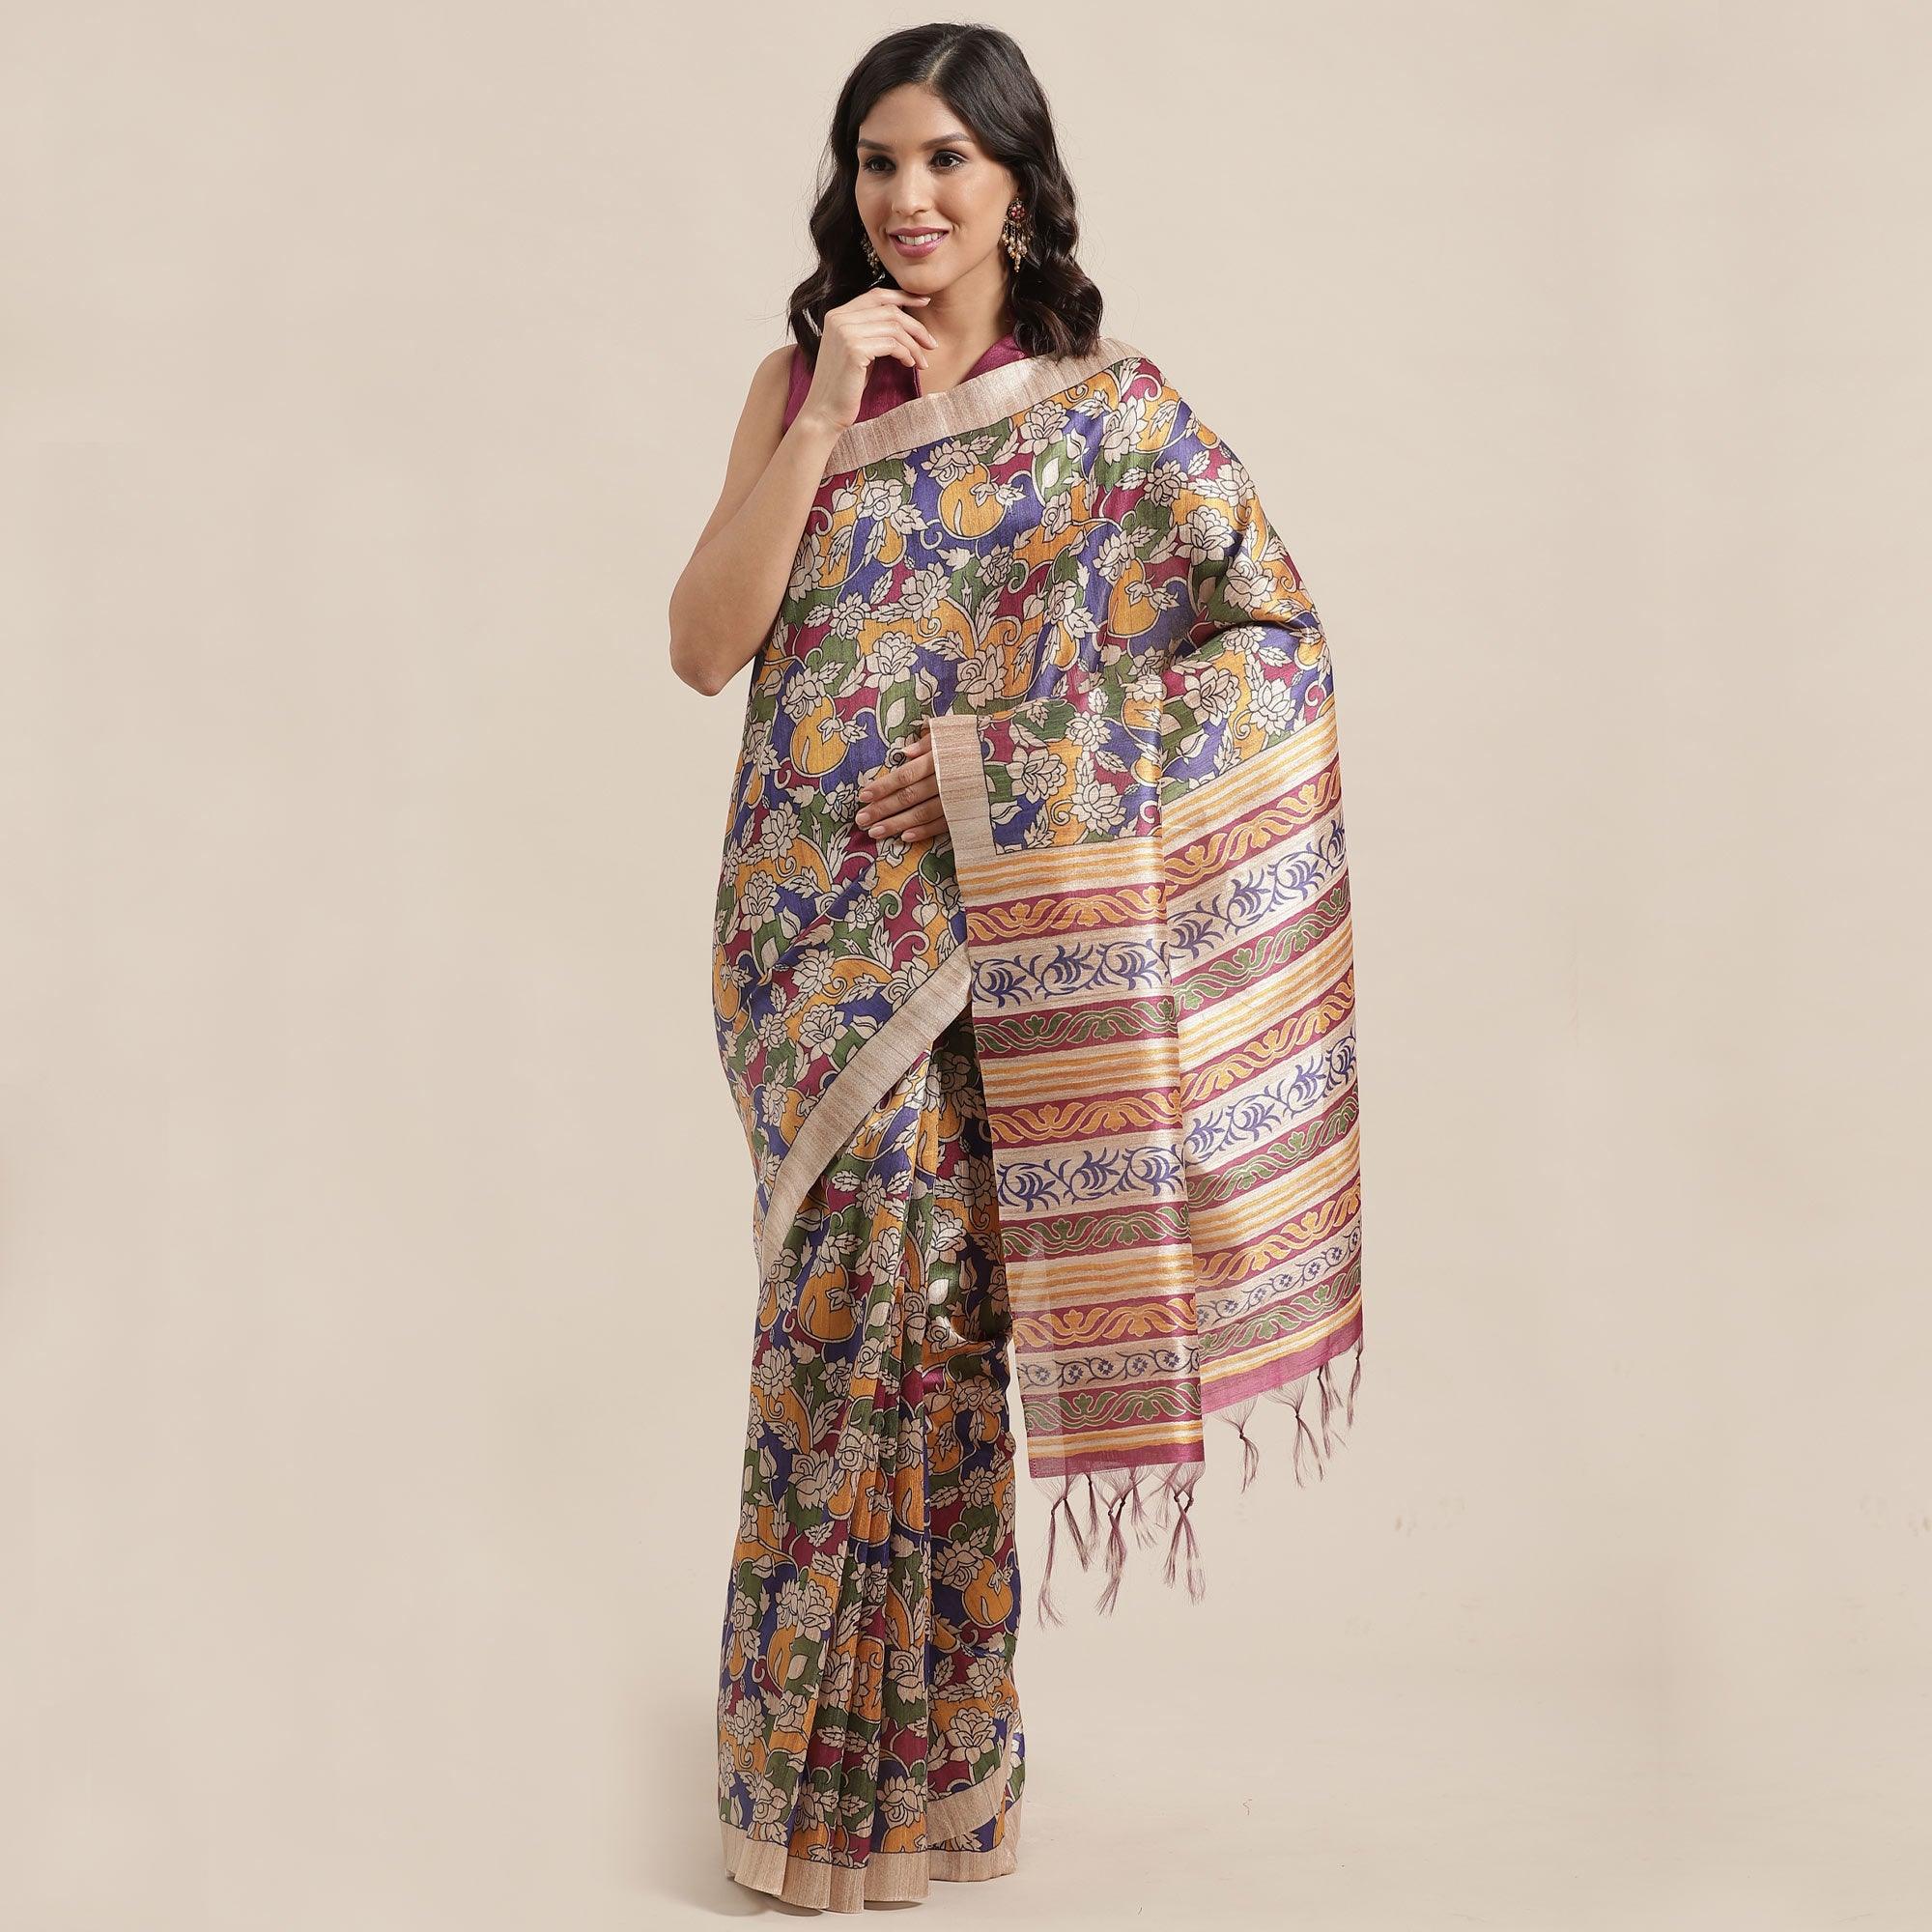 Refreshing Beige-Multi Colored Casual Wear Floral Printed Silk Blend Saree With Tassels - Peachmode